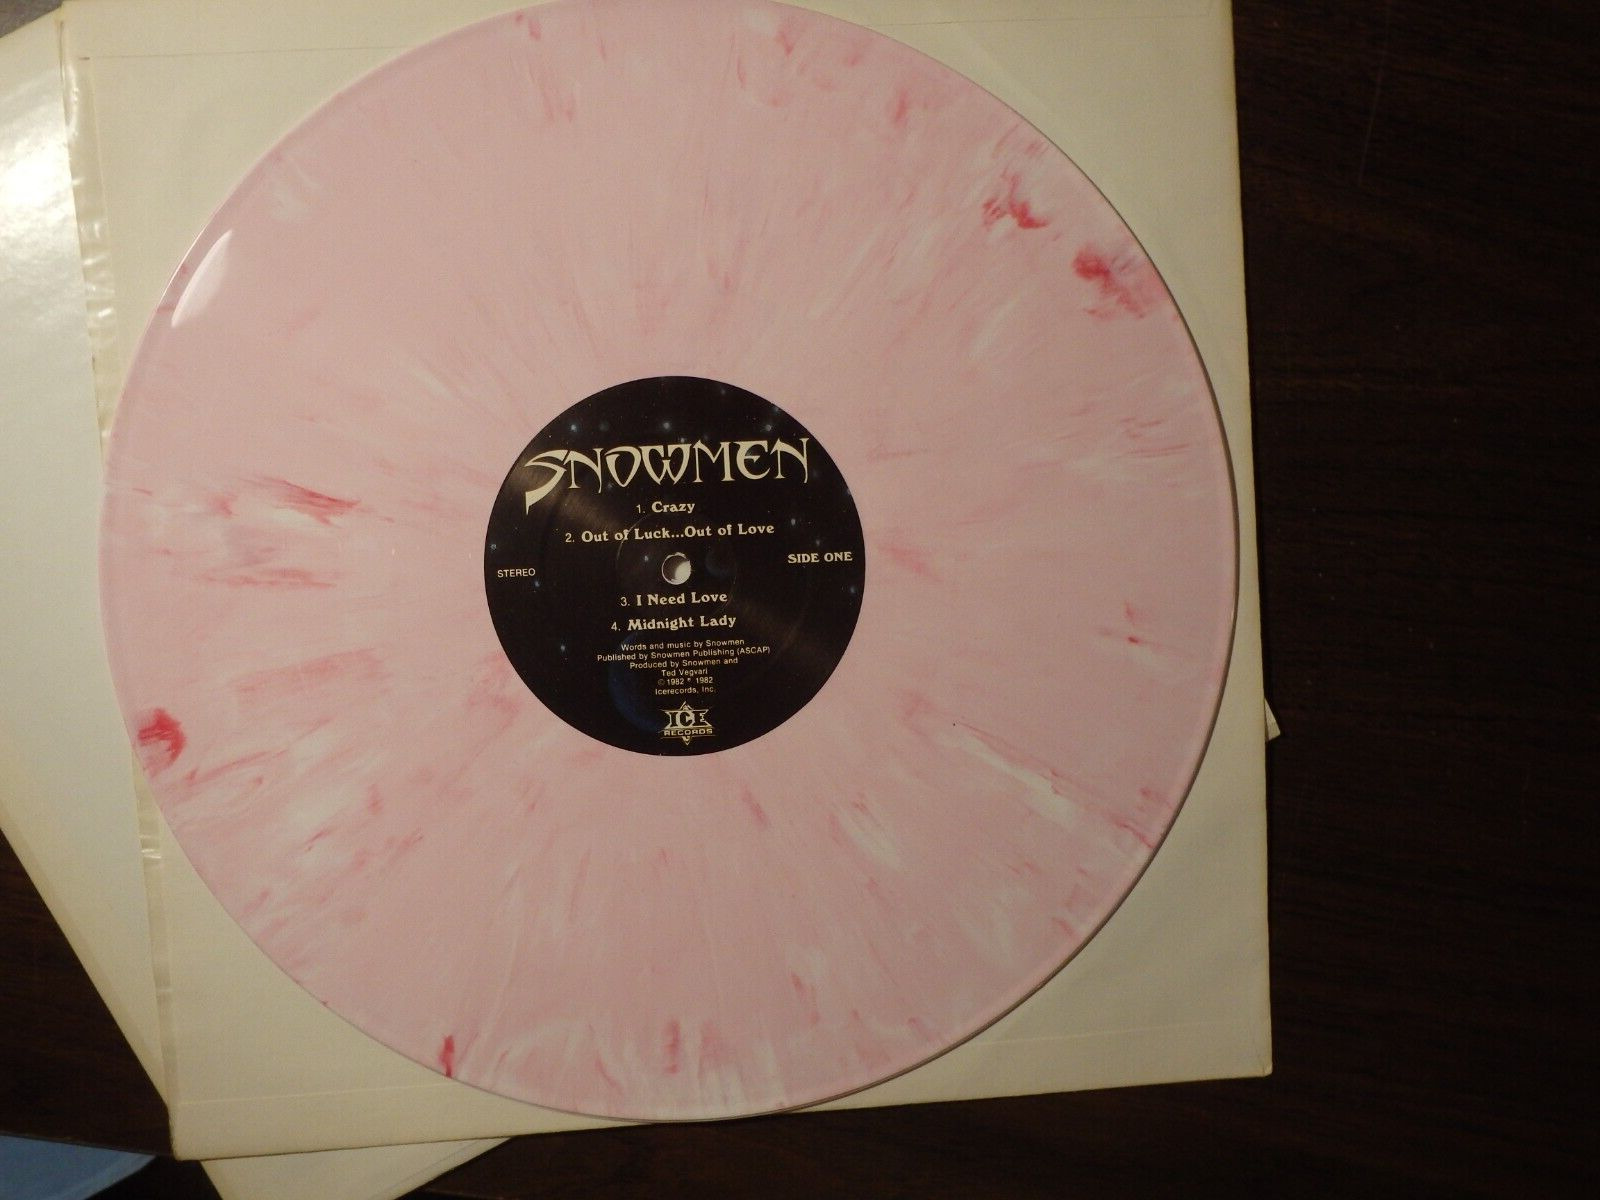 Snowmen. 1982. Pink & Red vinyl. ICE Records Crazy, Trouble, Piece of the Action